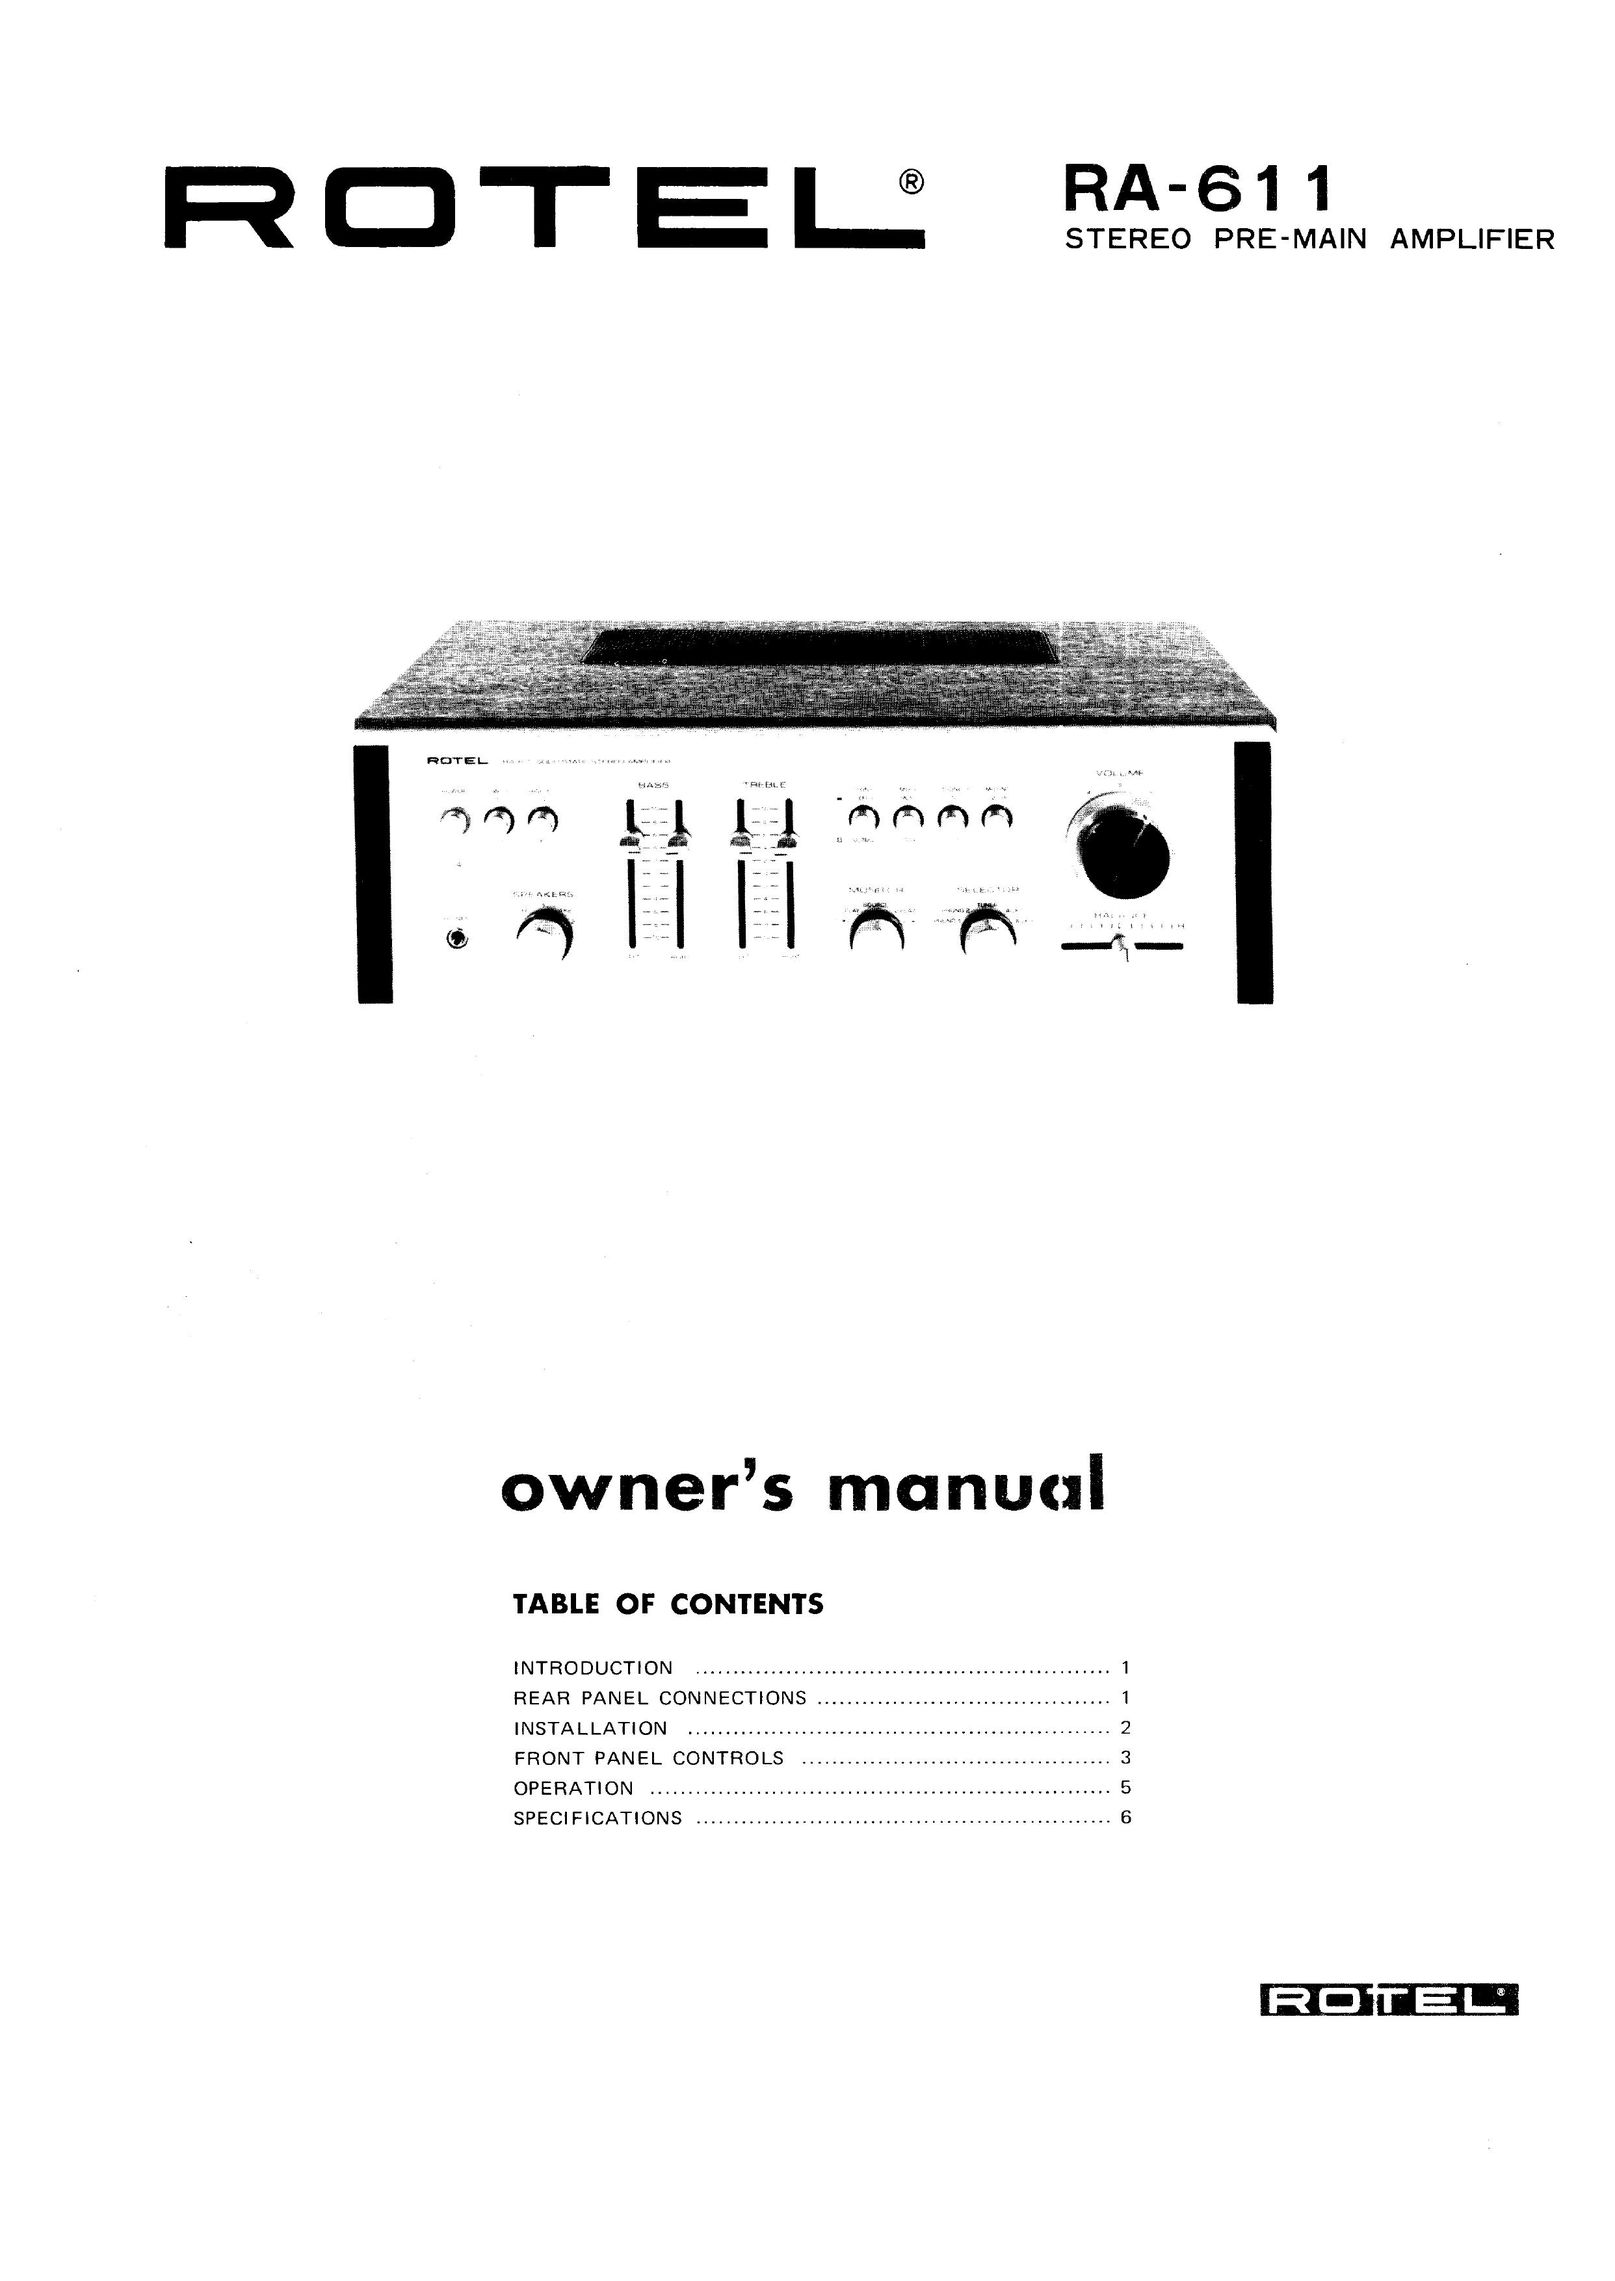 Rotel RA-611 Stereo Amplifier User Manual